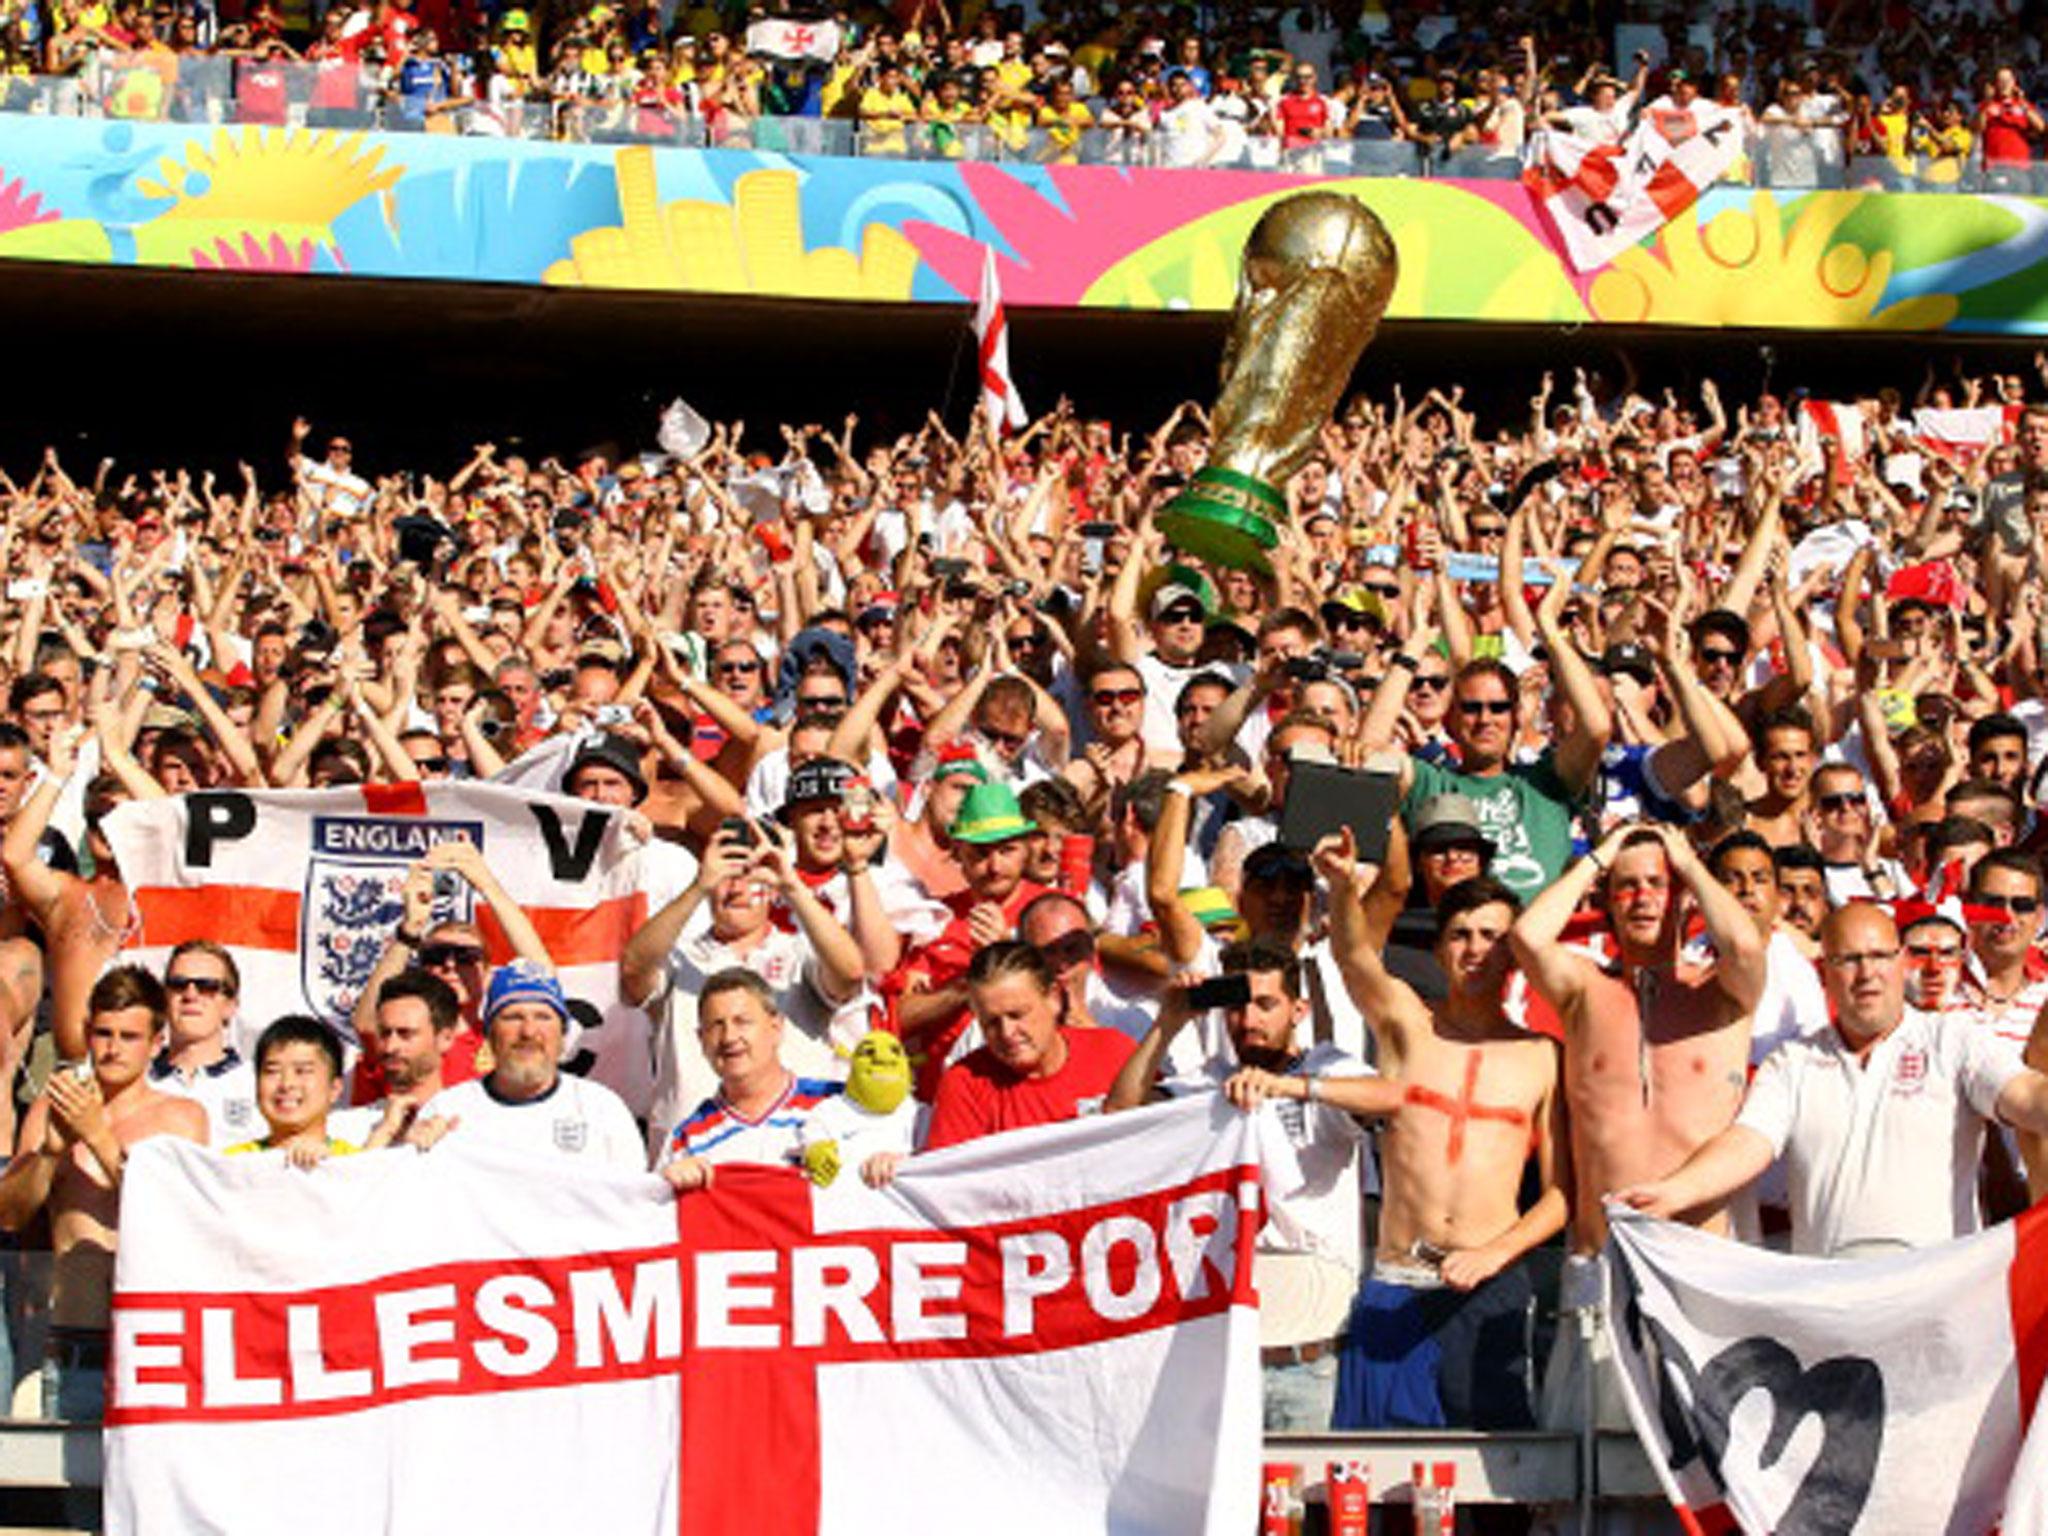 &#13;
England supporters are expected to travel in large numbers to France for this month's tournament (Getty)&#13;